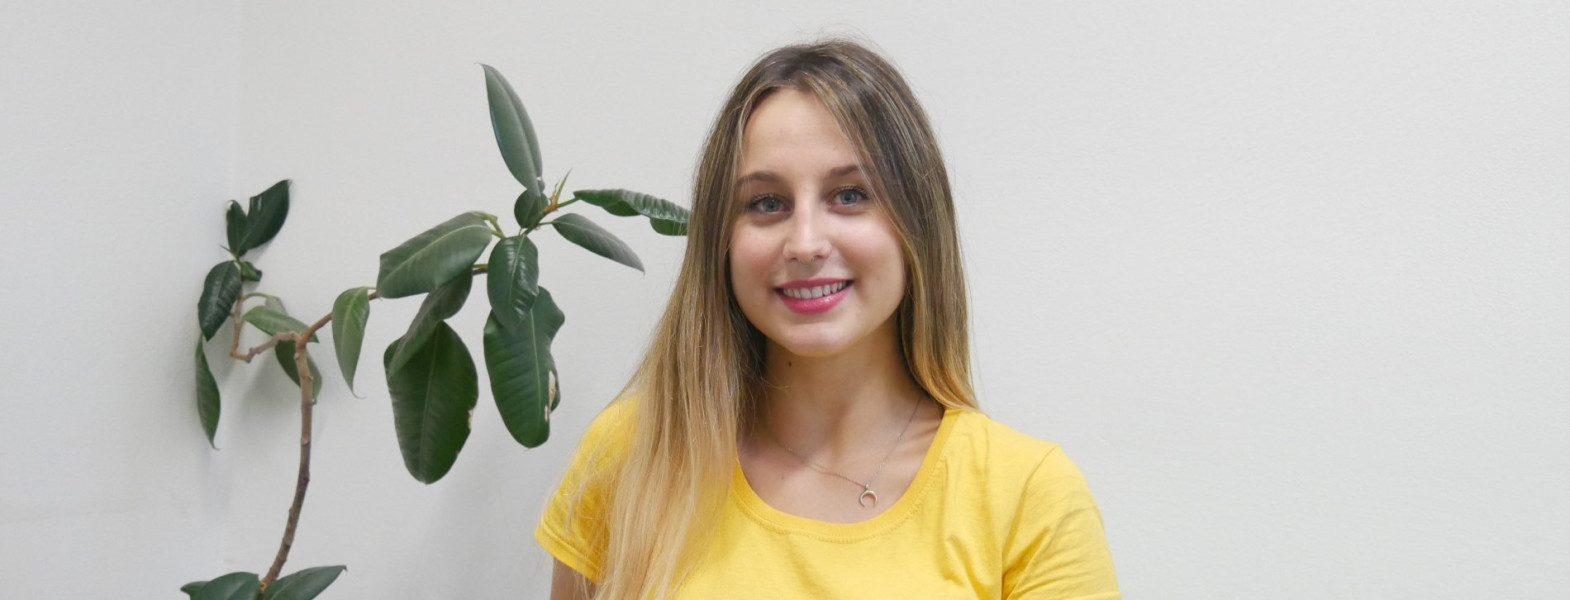 Eva Fernandez, EU Aid Volunteer: A great opportunity for me to learn about Georgia